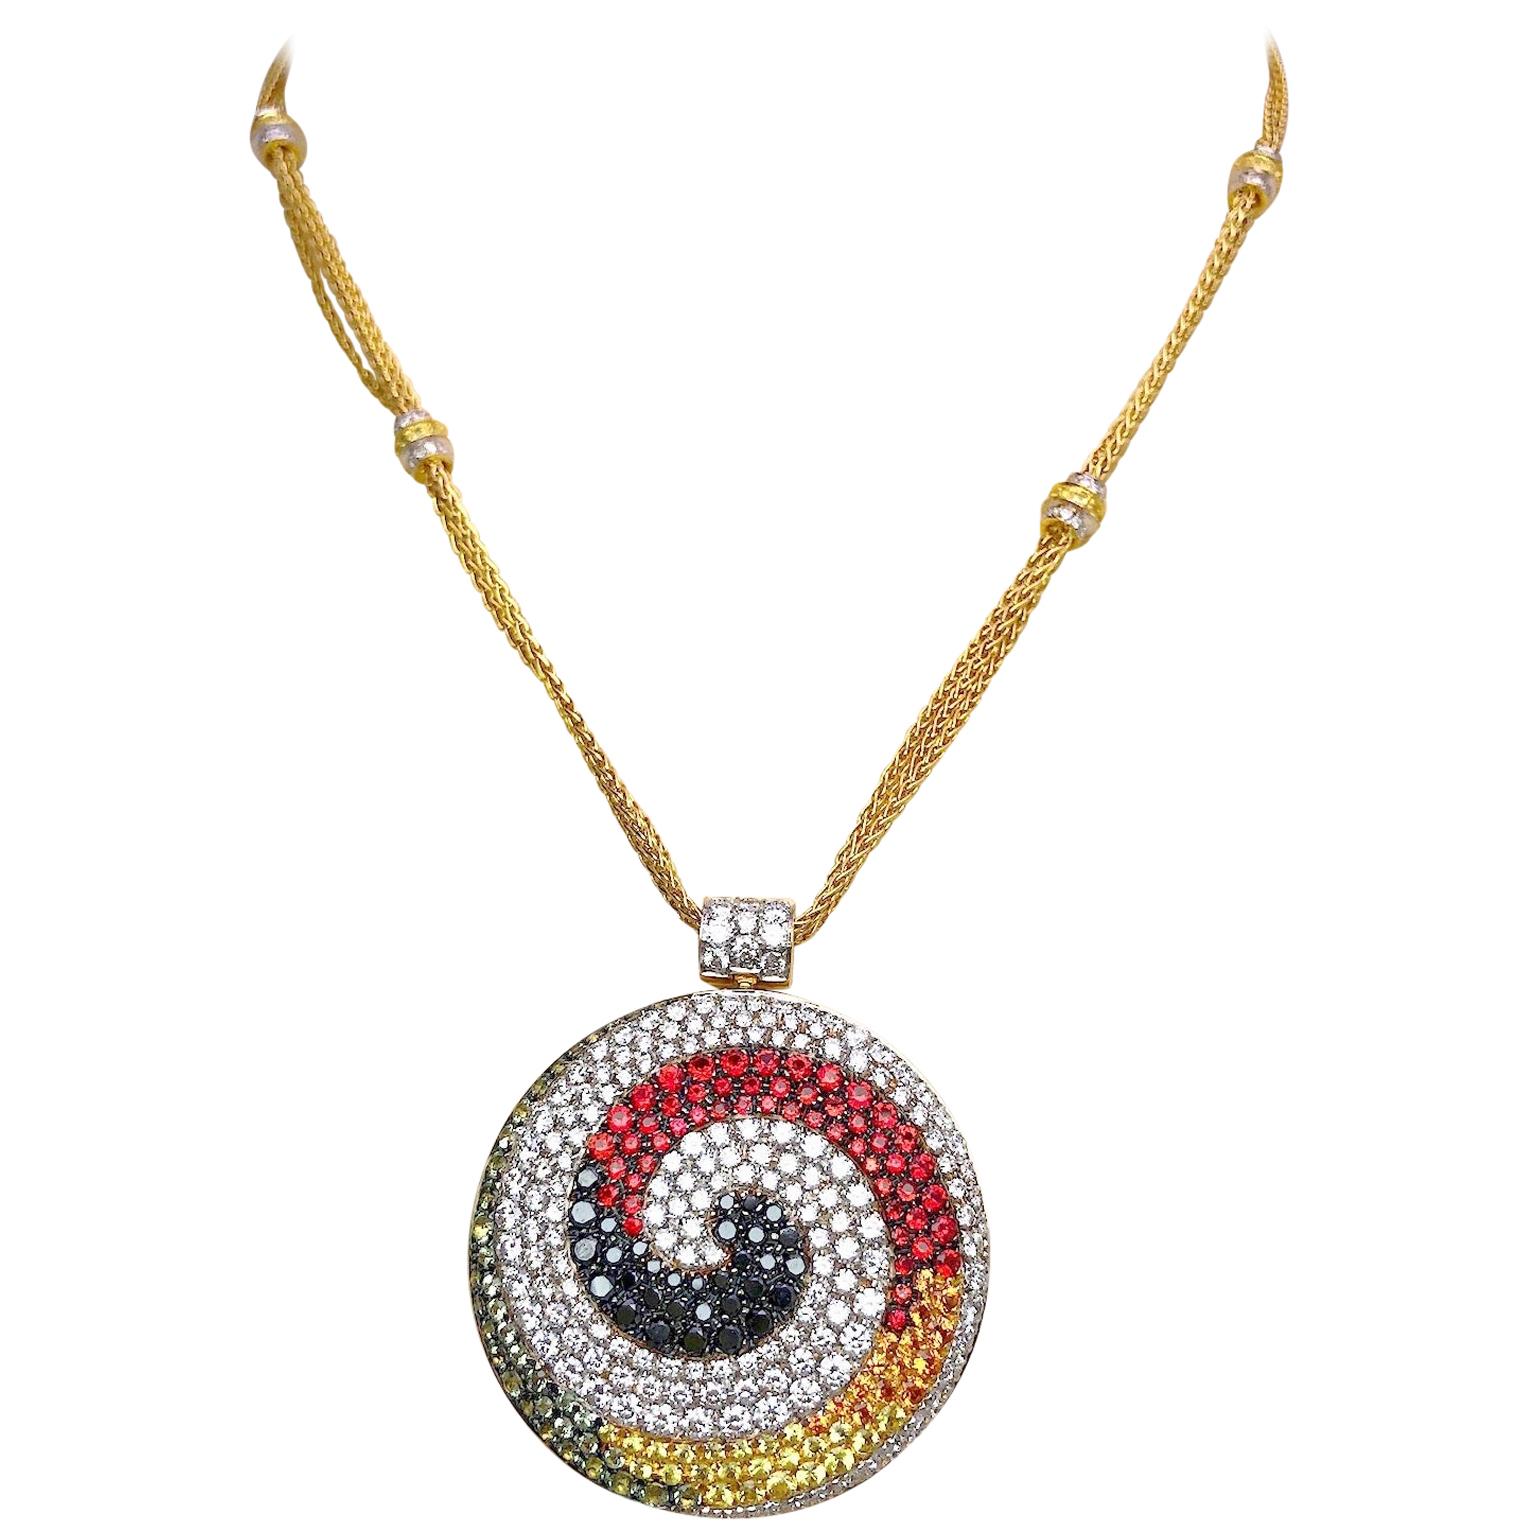 Valente 18 KT Yellow Gold Swirl Pendant with Diamonds and Multicolored Sapphires